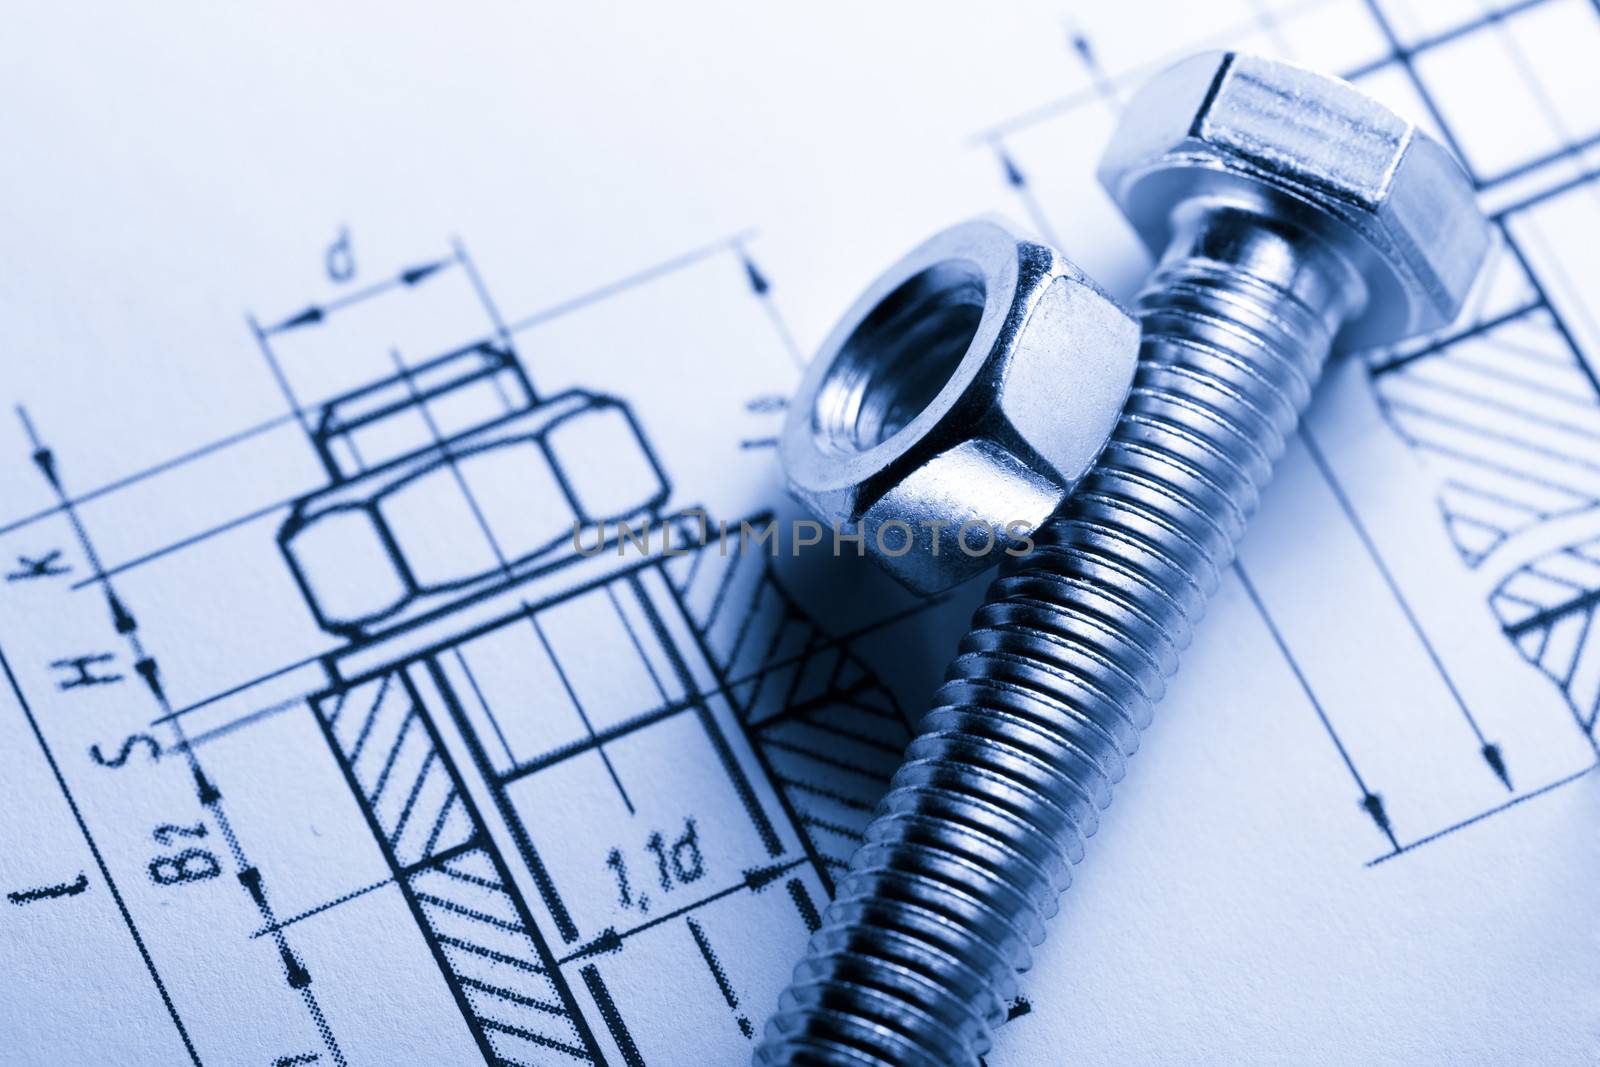 Drafting and screw bolt with nut